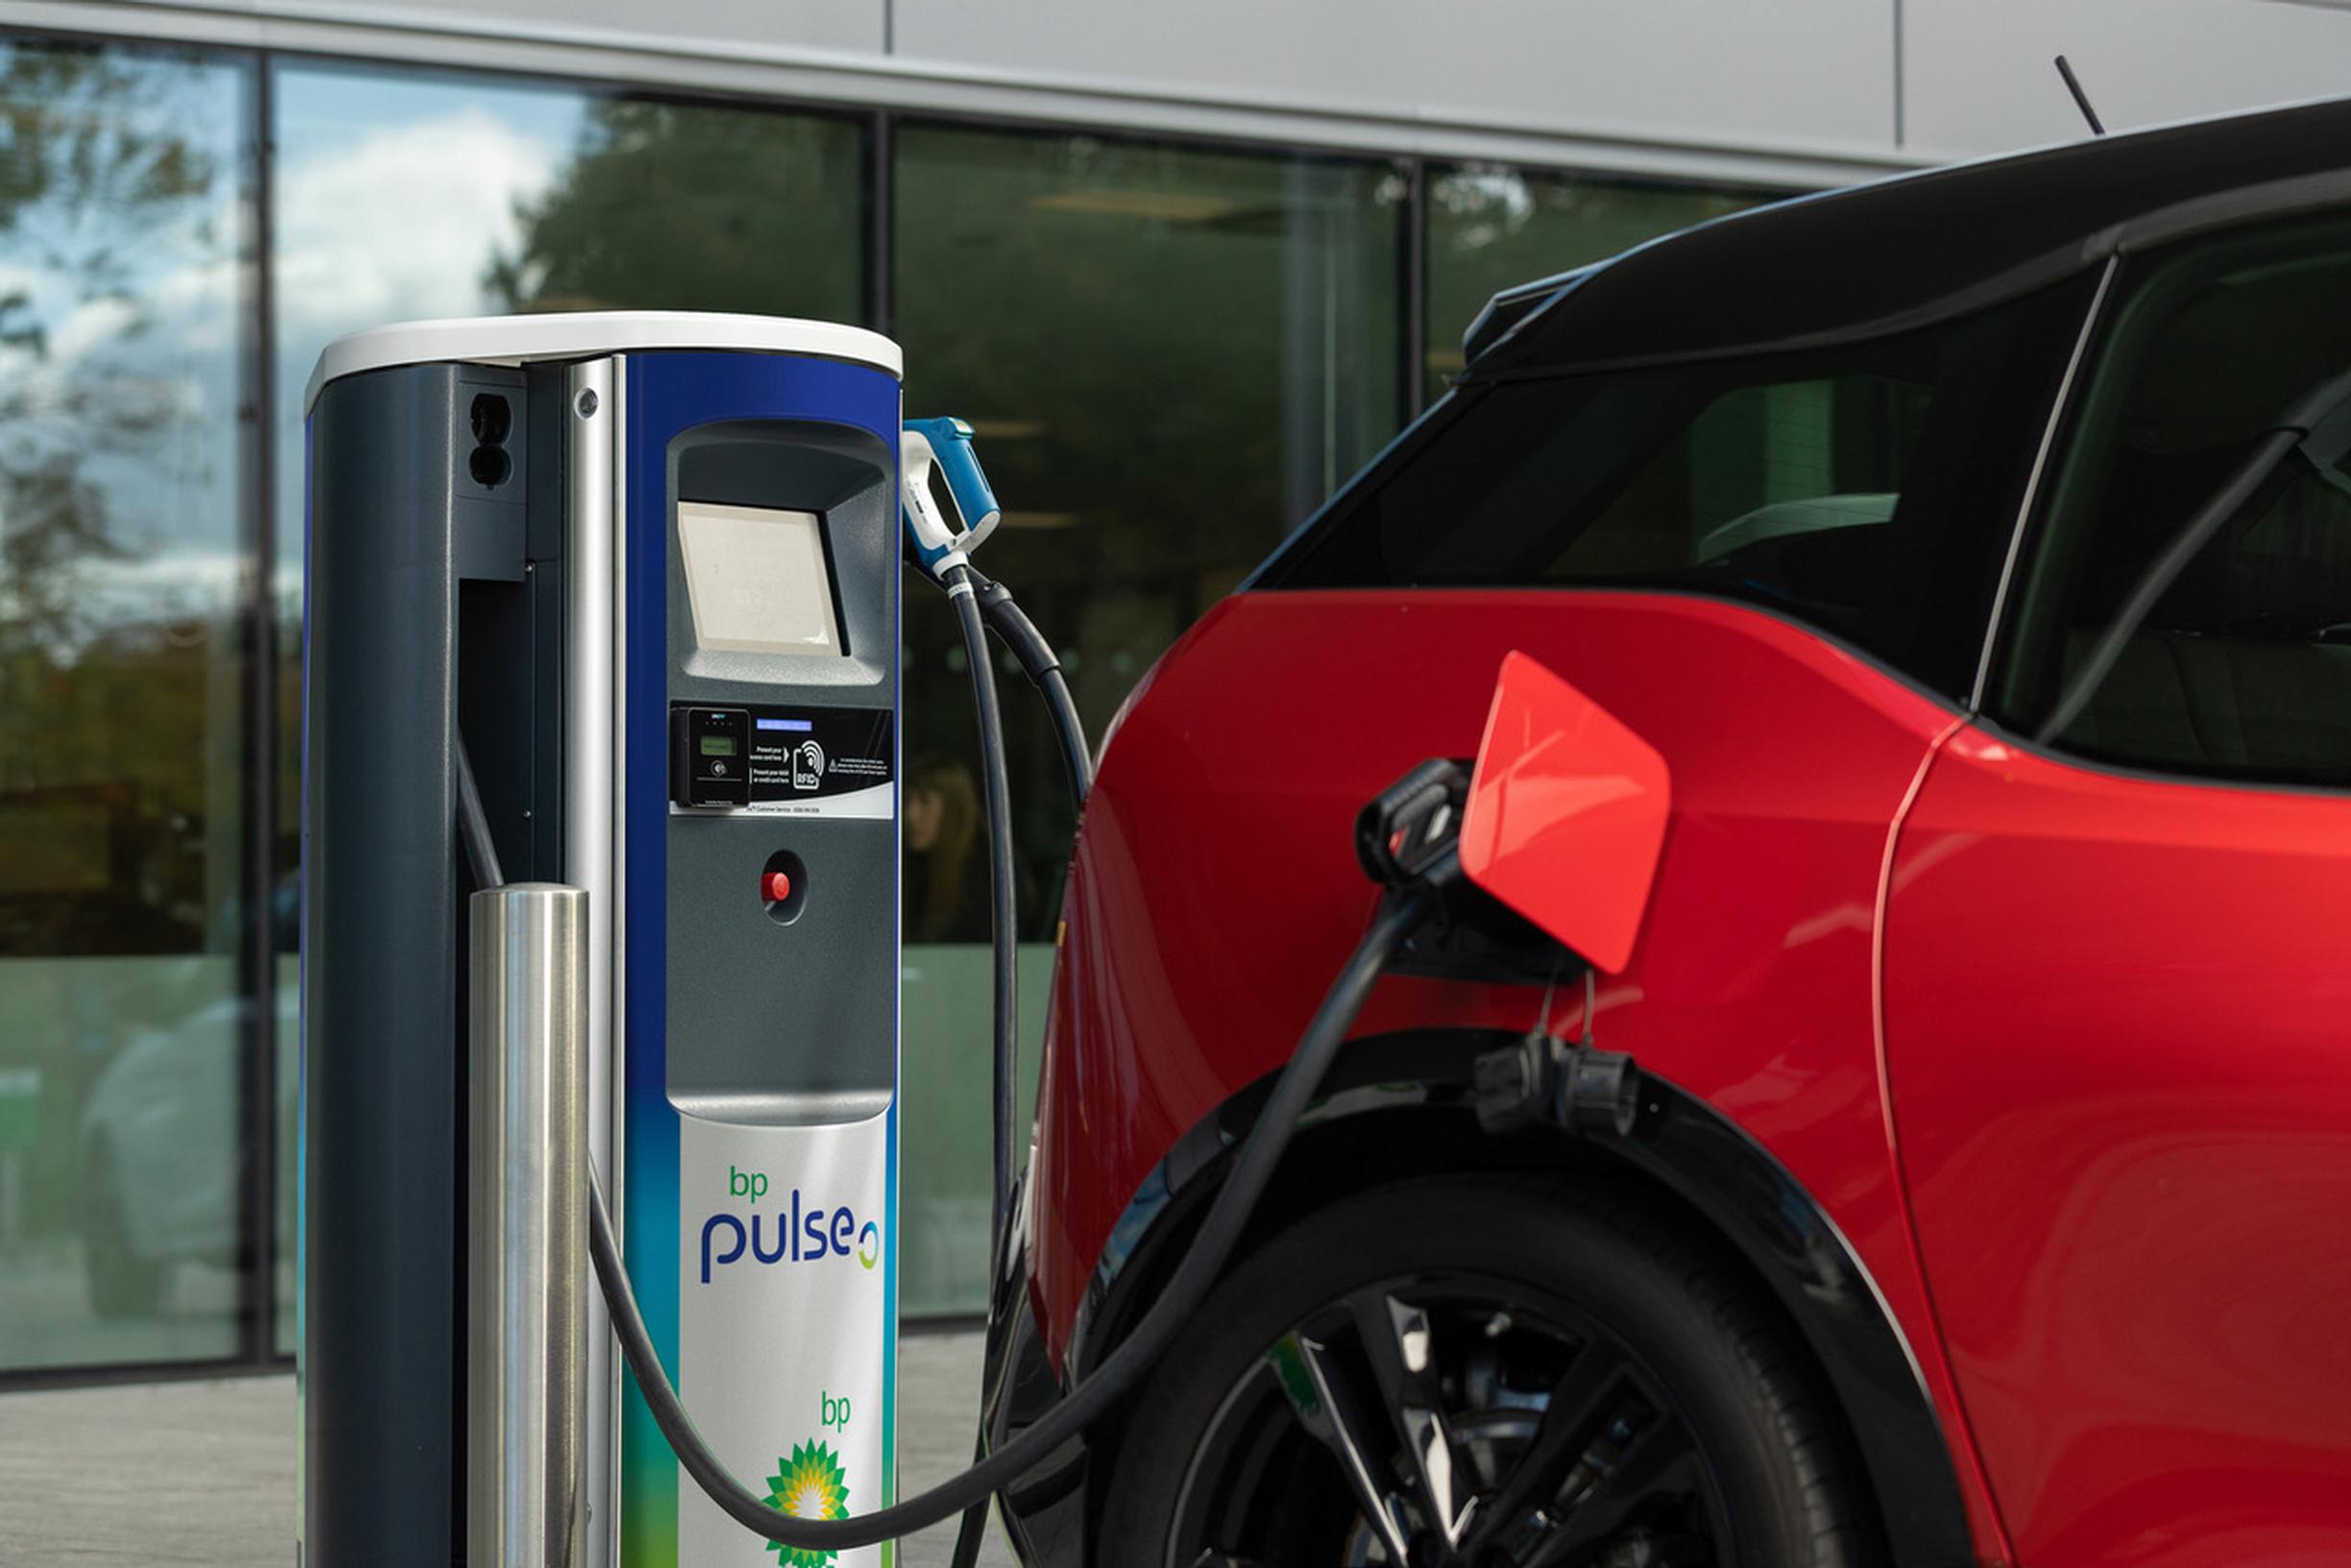 By the end of 2030, nearly a third of all vehicles in the Midlands could be electric, says WSP